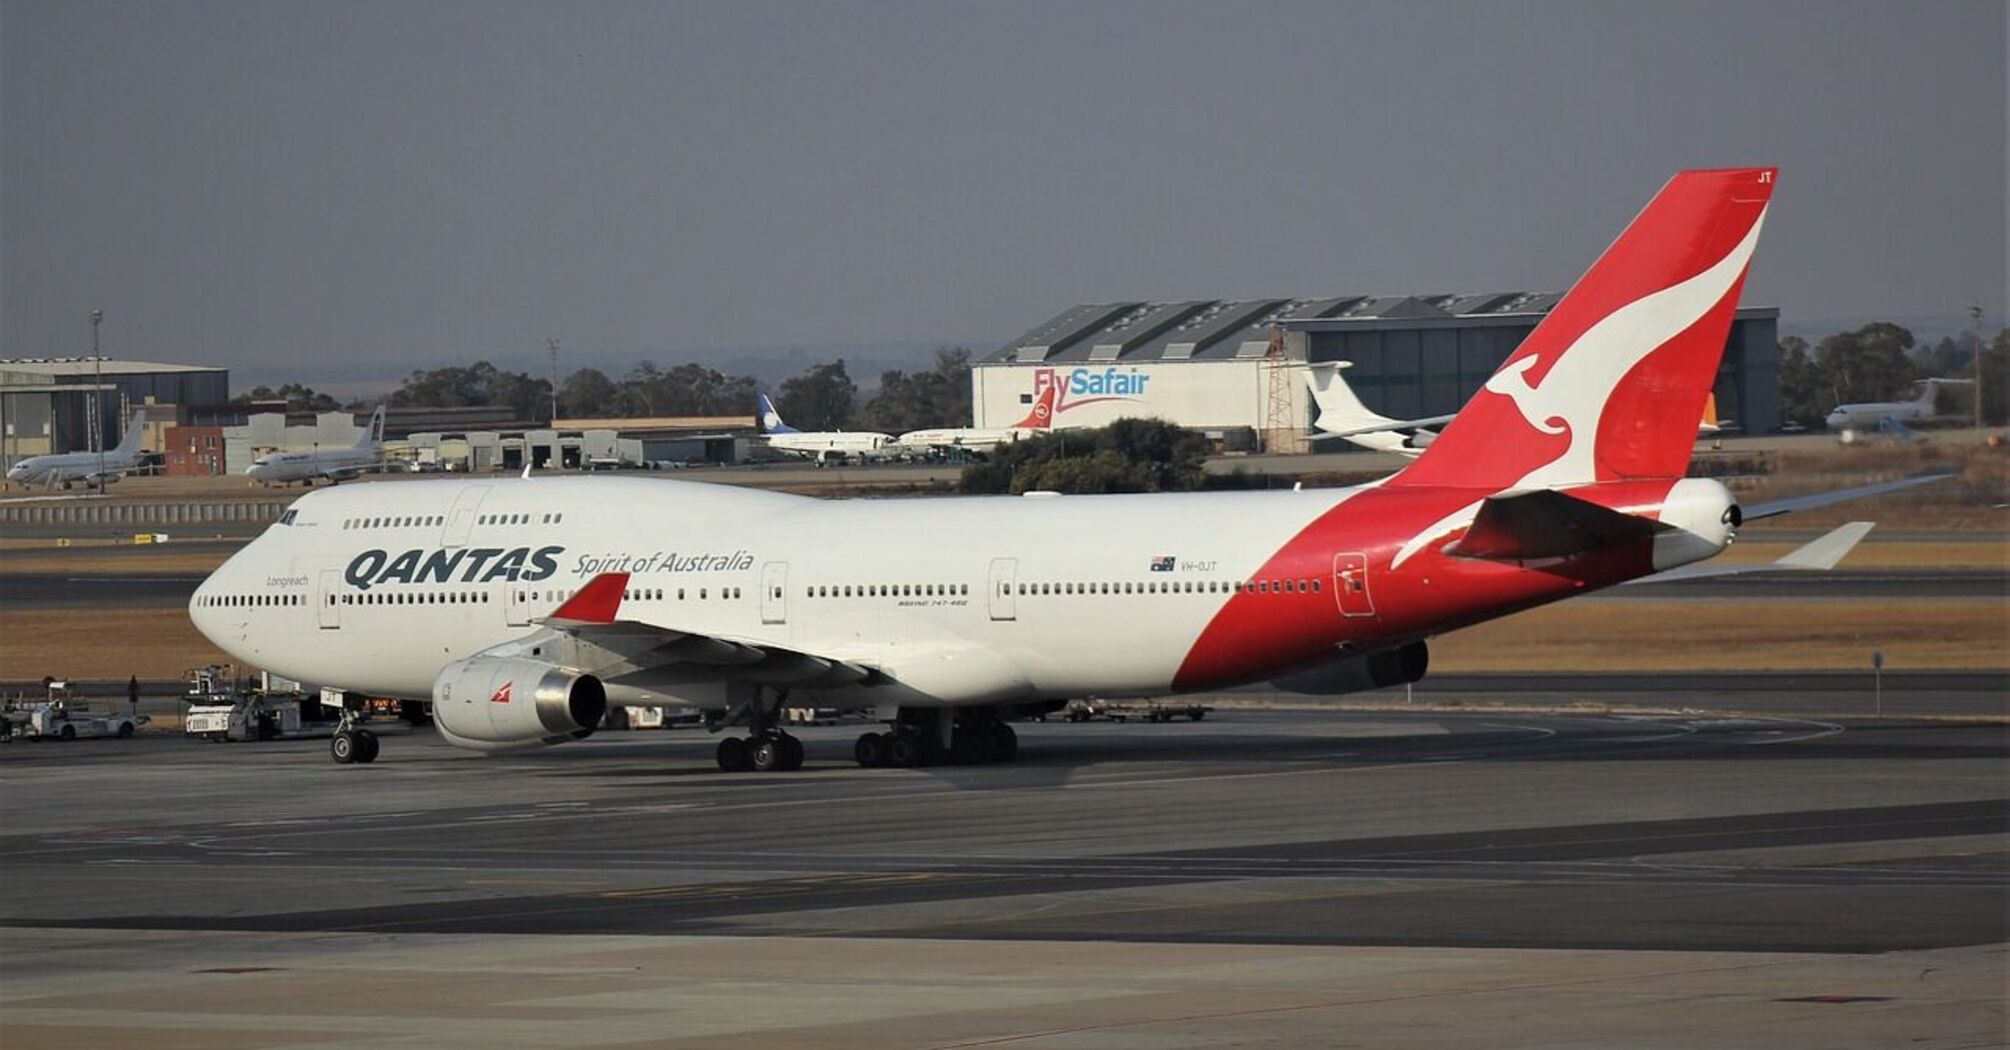 A Qantas baggage handler lost his job over an offensive word written on a tag